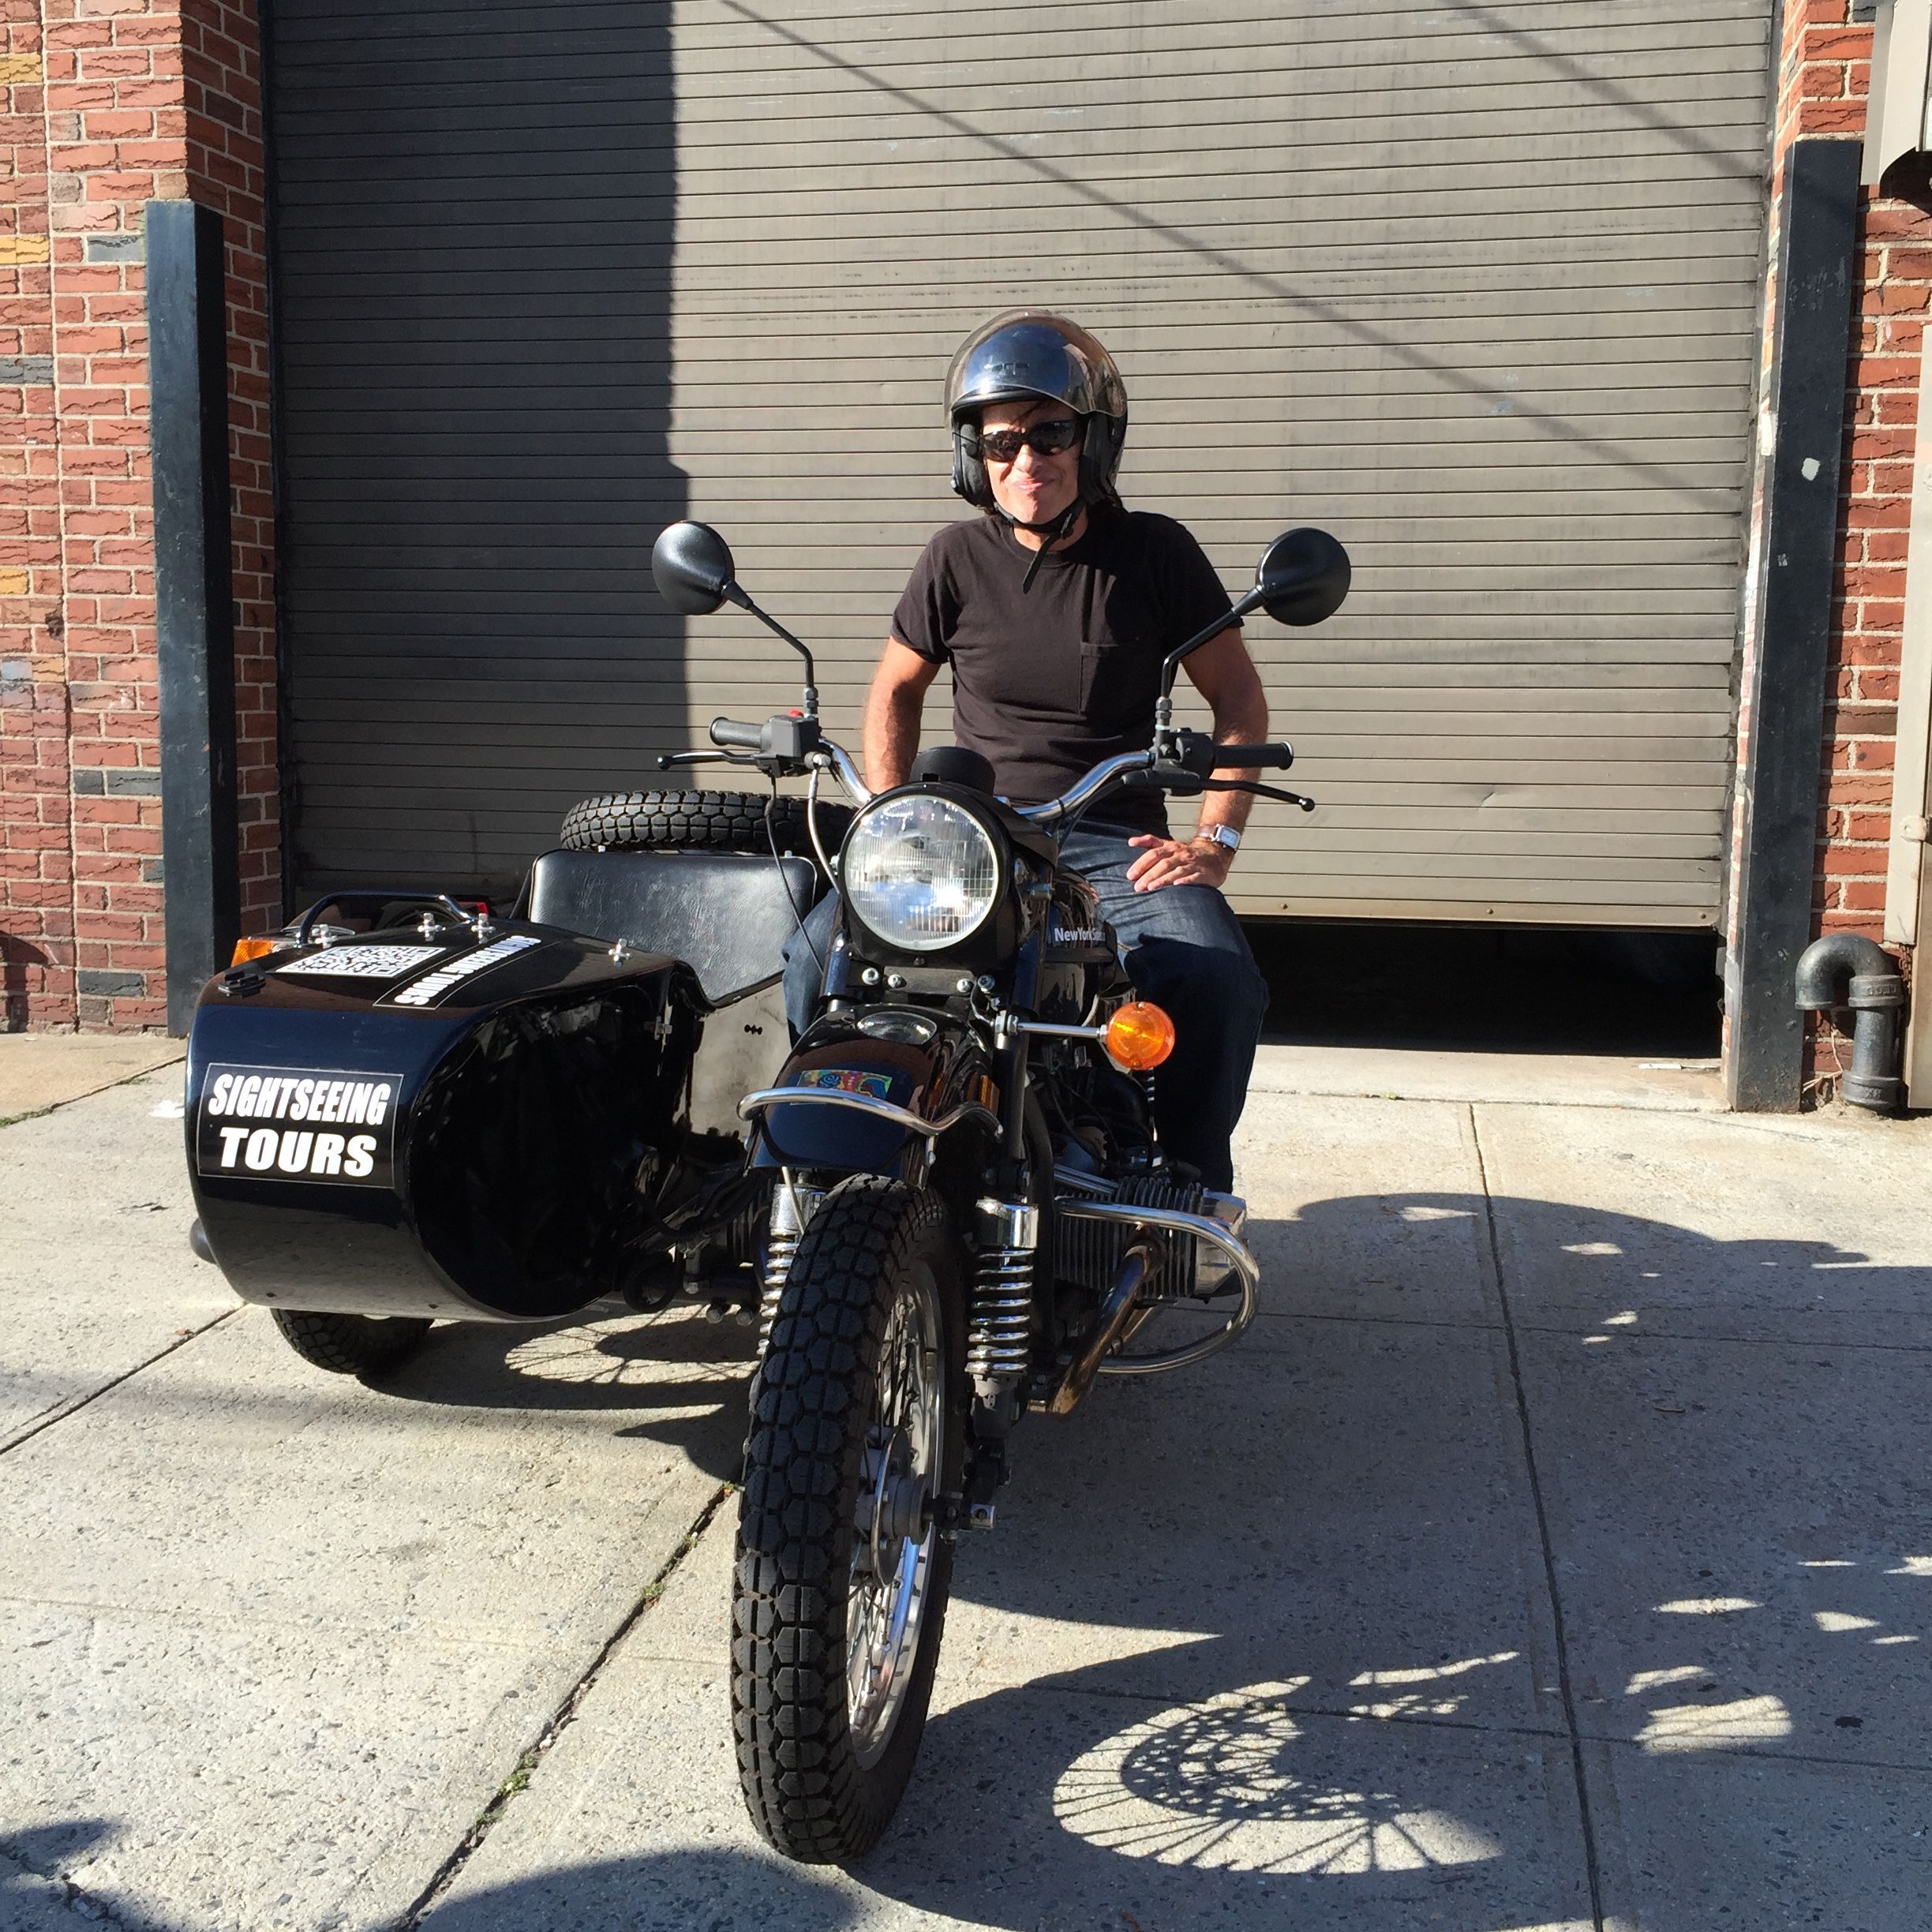 Anthony Sepulveda gives side car tours of New York